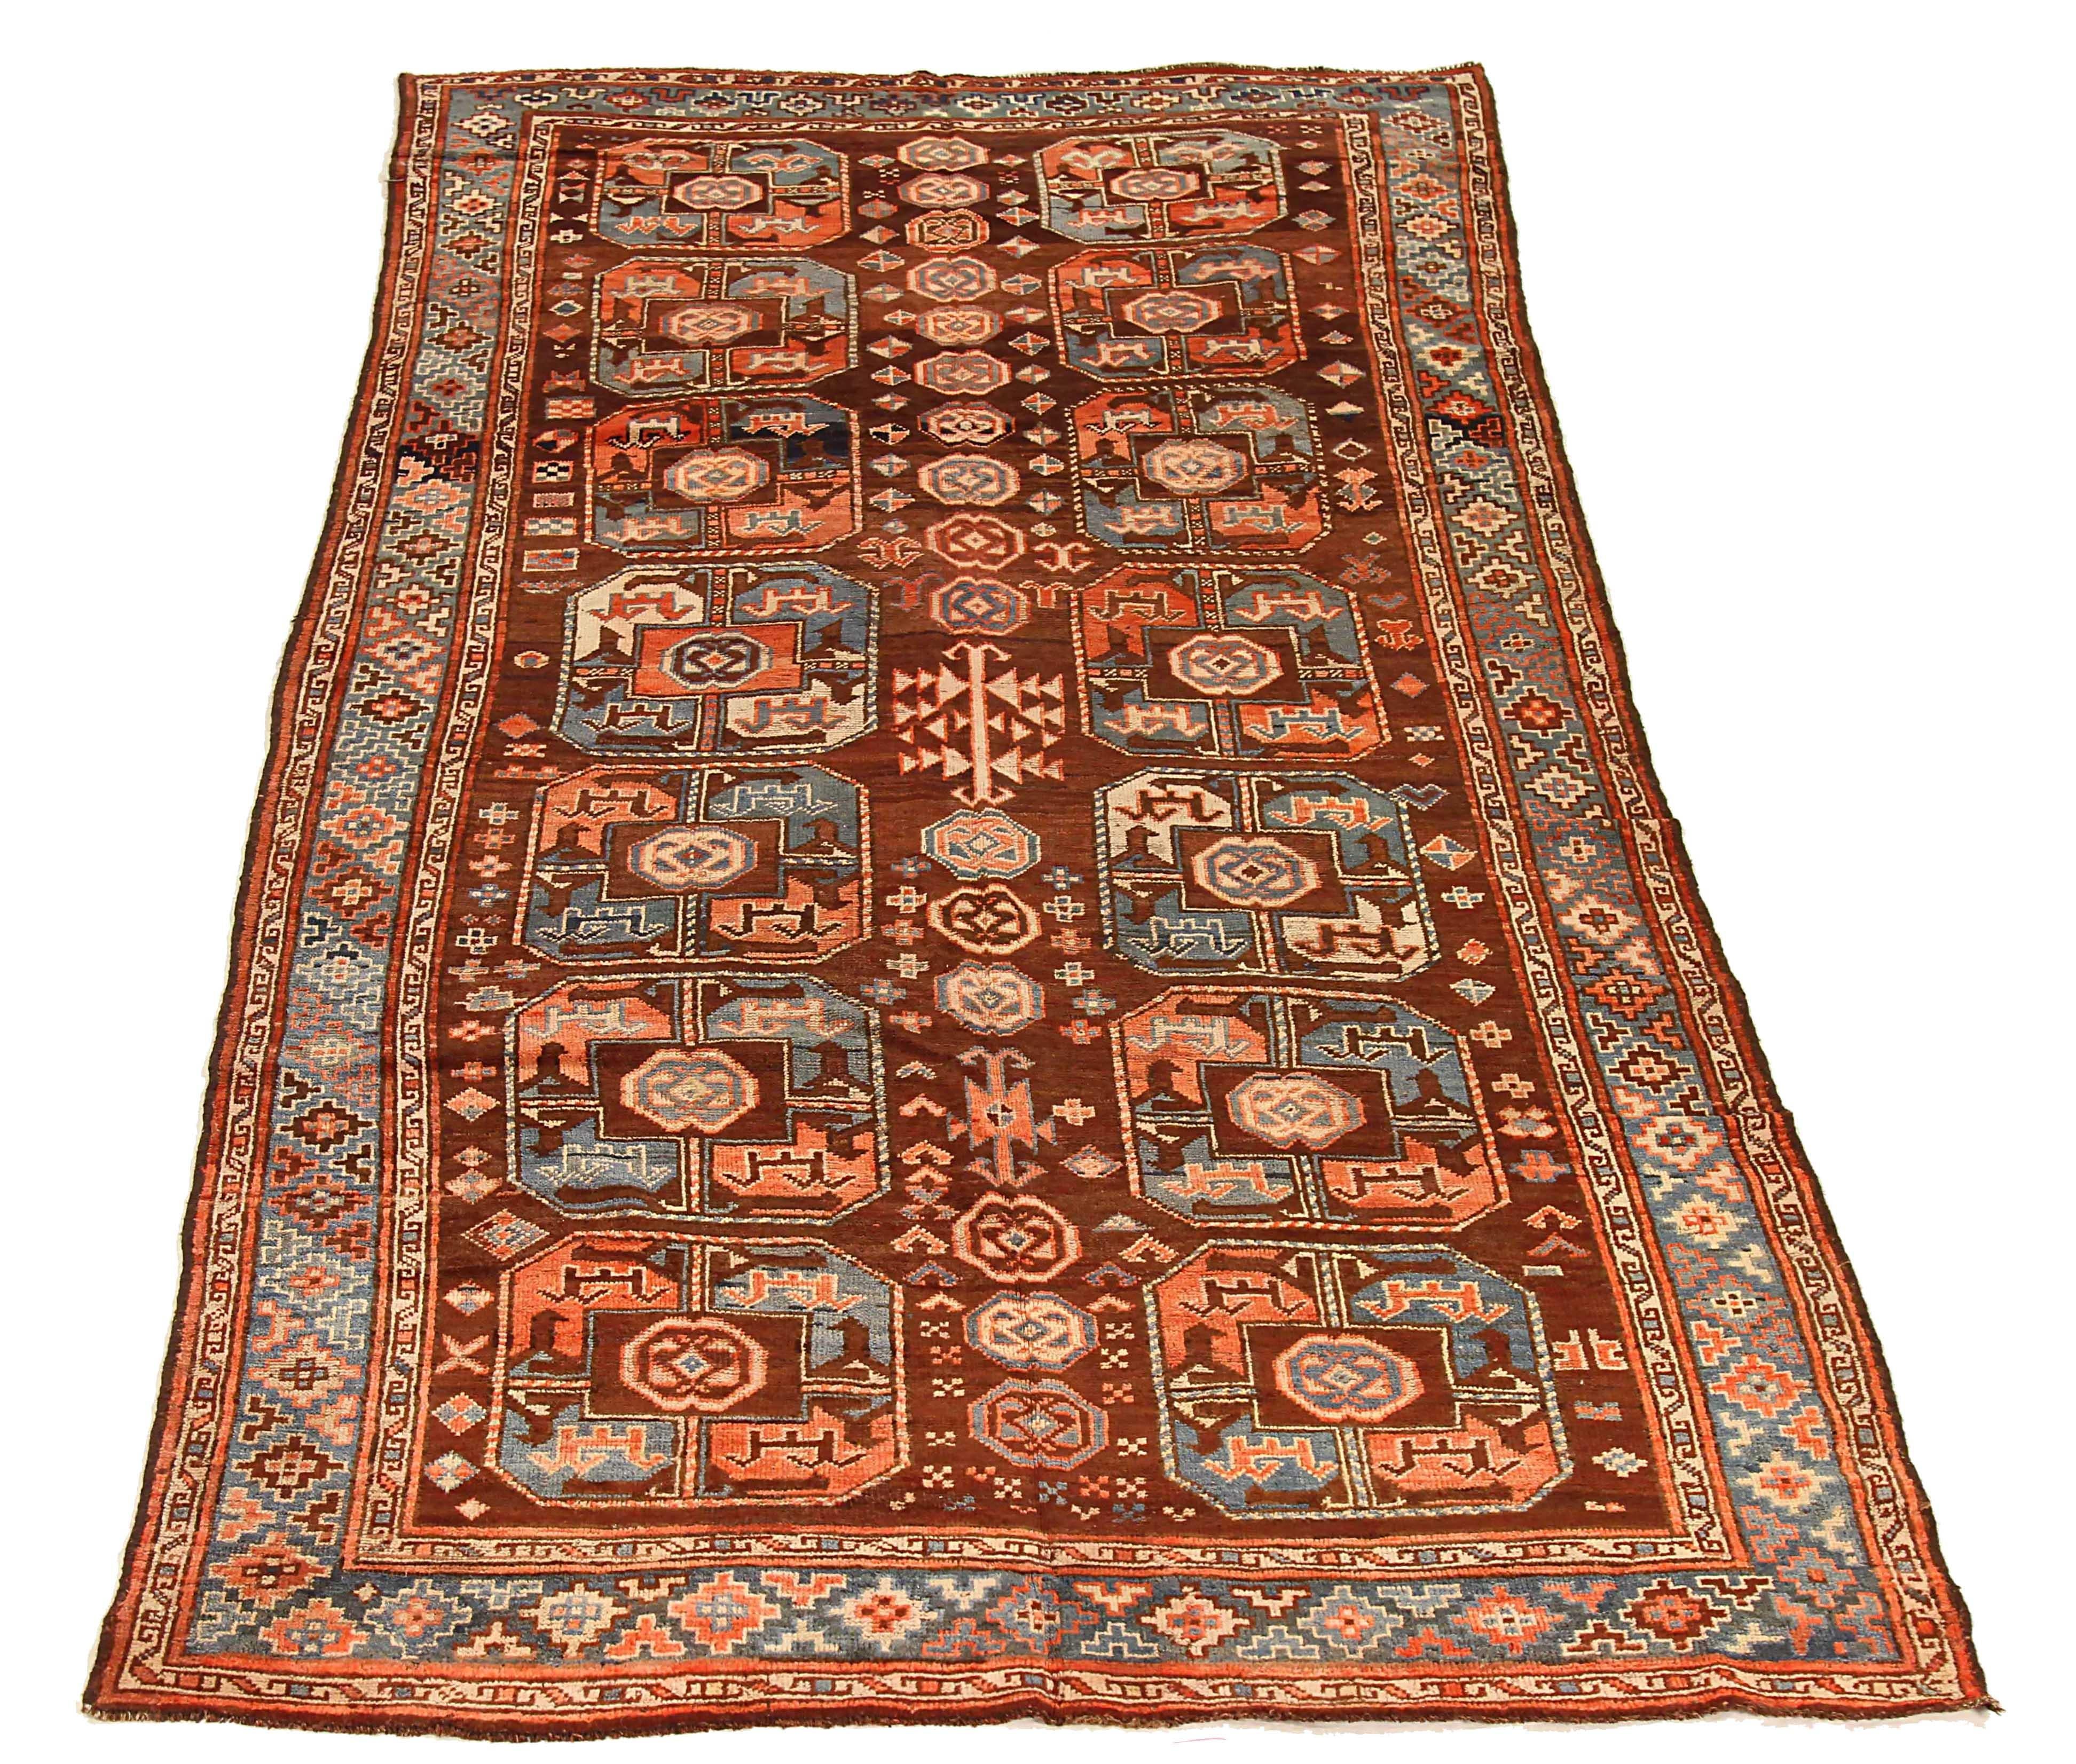 Antique Uzbekistan area rug handwoven from the finest sheep’s wool. It’s colored with all-natural vegetable dyes that are safe for humans and pets. It’s a traditional Samarghand design handwoven by expert artisans. It’s a lovely area rug that can be